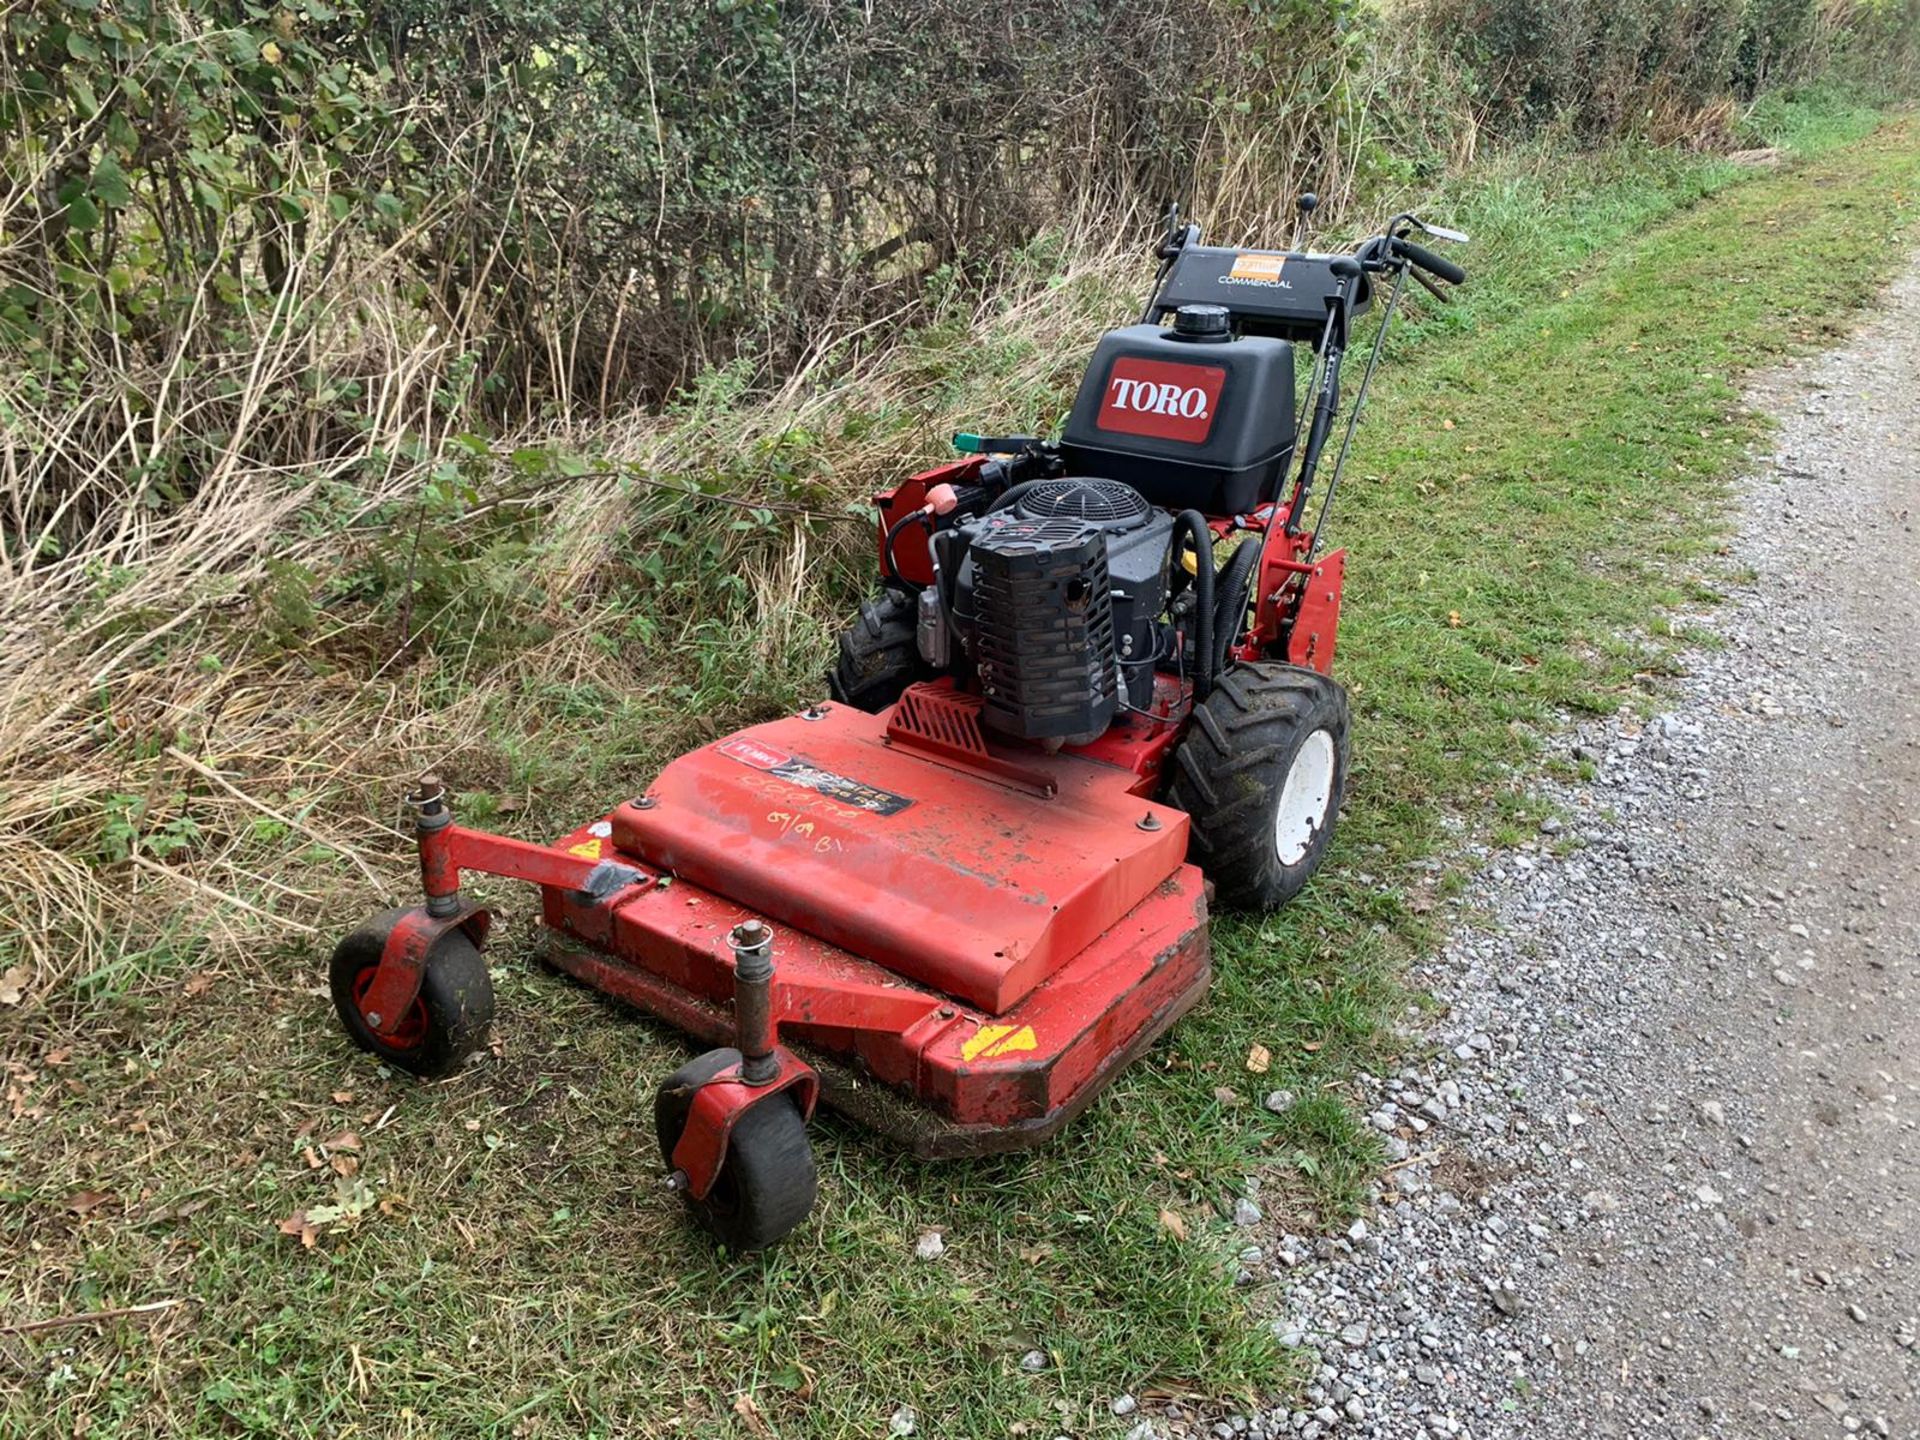 TORO 36" WALK BEHIND PEDESTRIAN MOWER, RUNS DRIVES AND CUTS WELL, PULL OR ELECTRIC START - Image 2 of 10